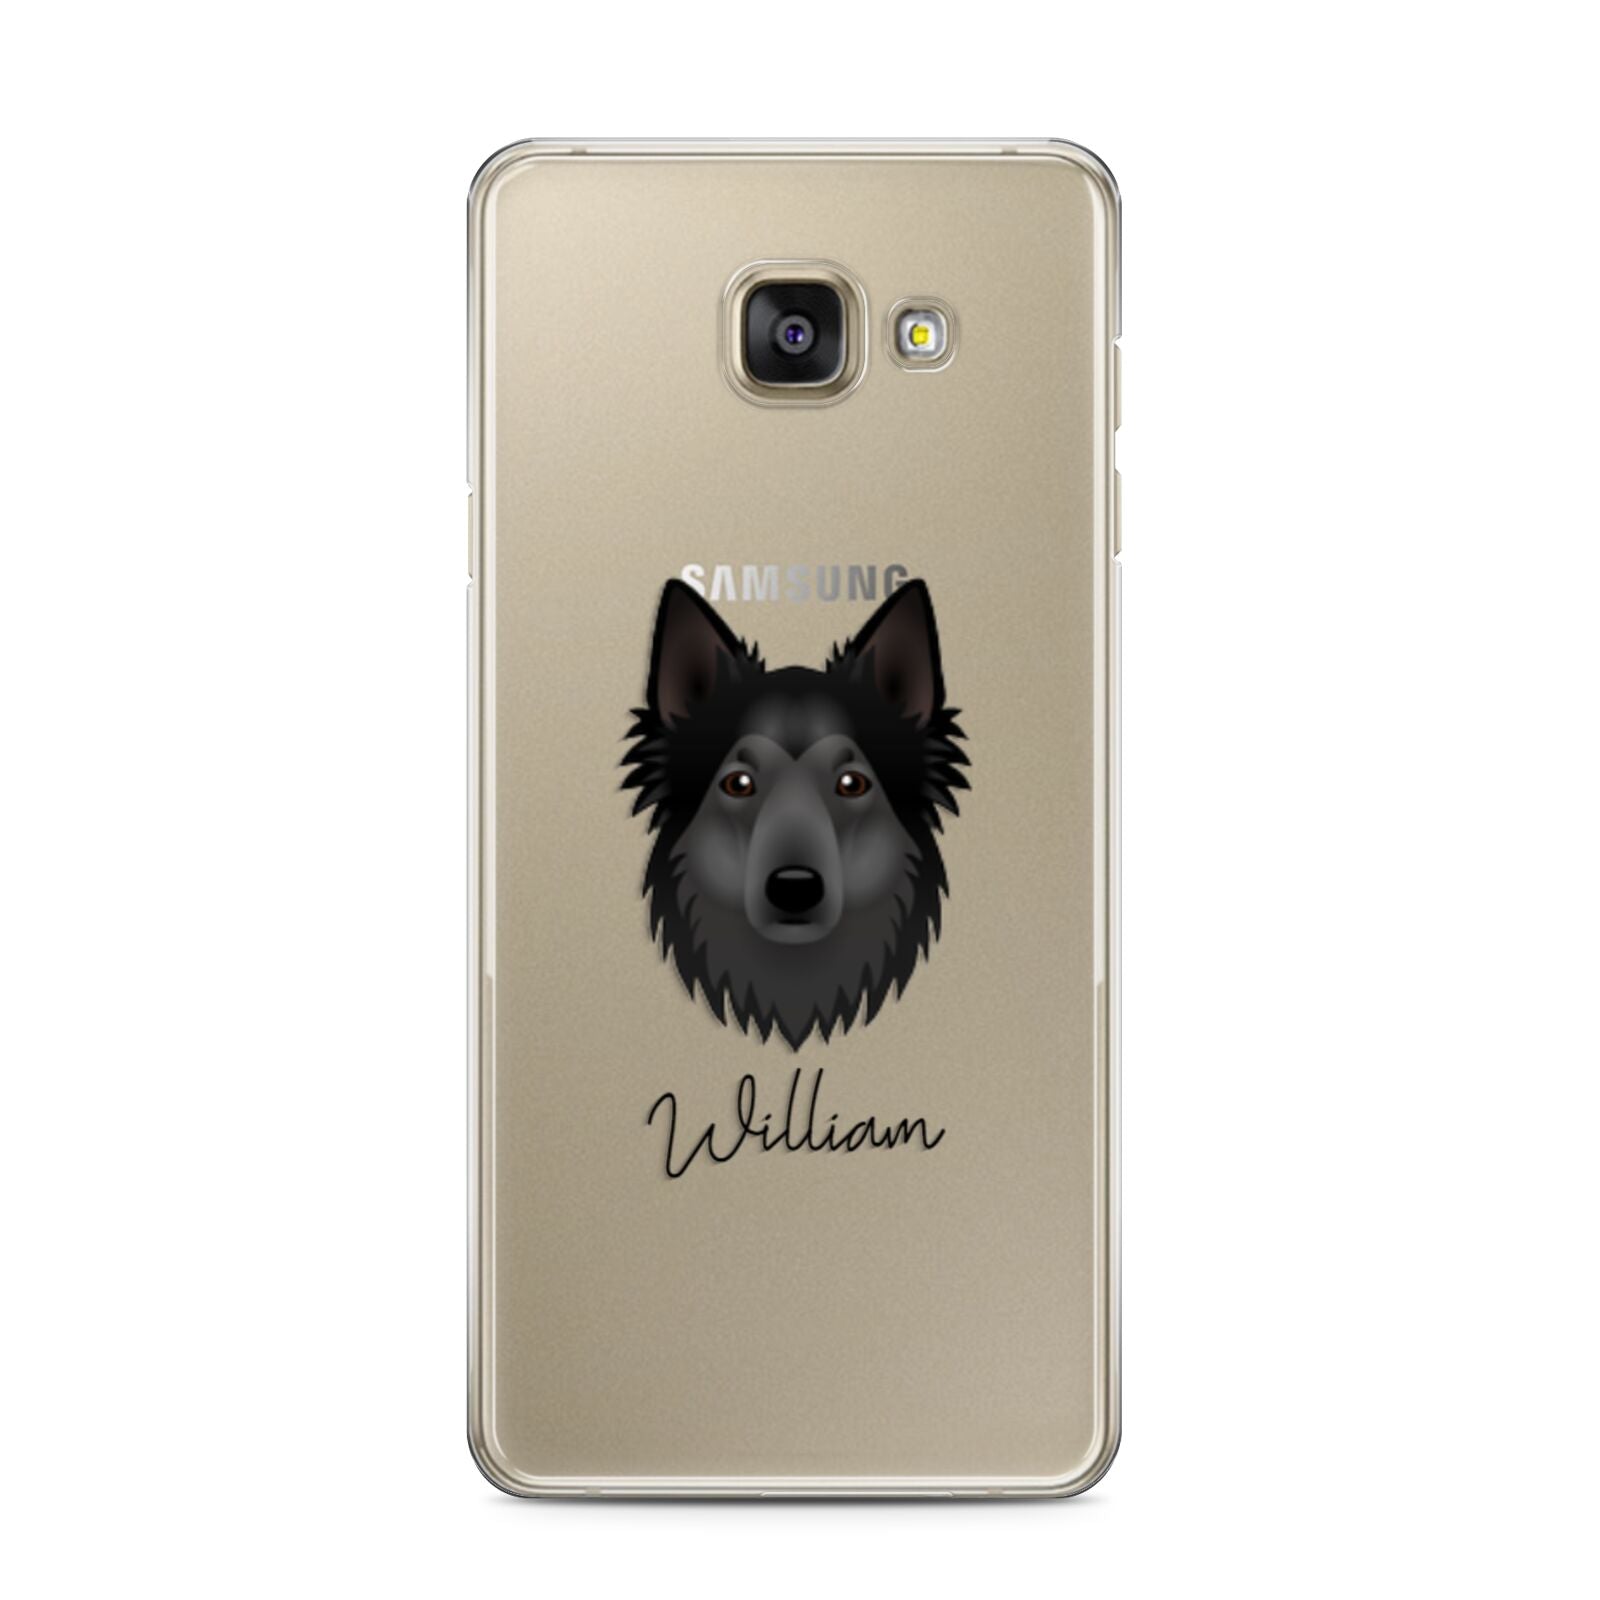 Shollie Personalised Samsung Galaxy A3 2016 Case on gold phone